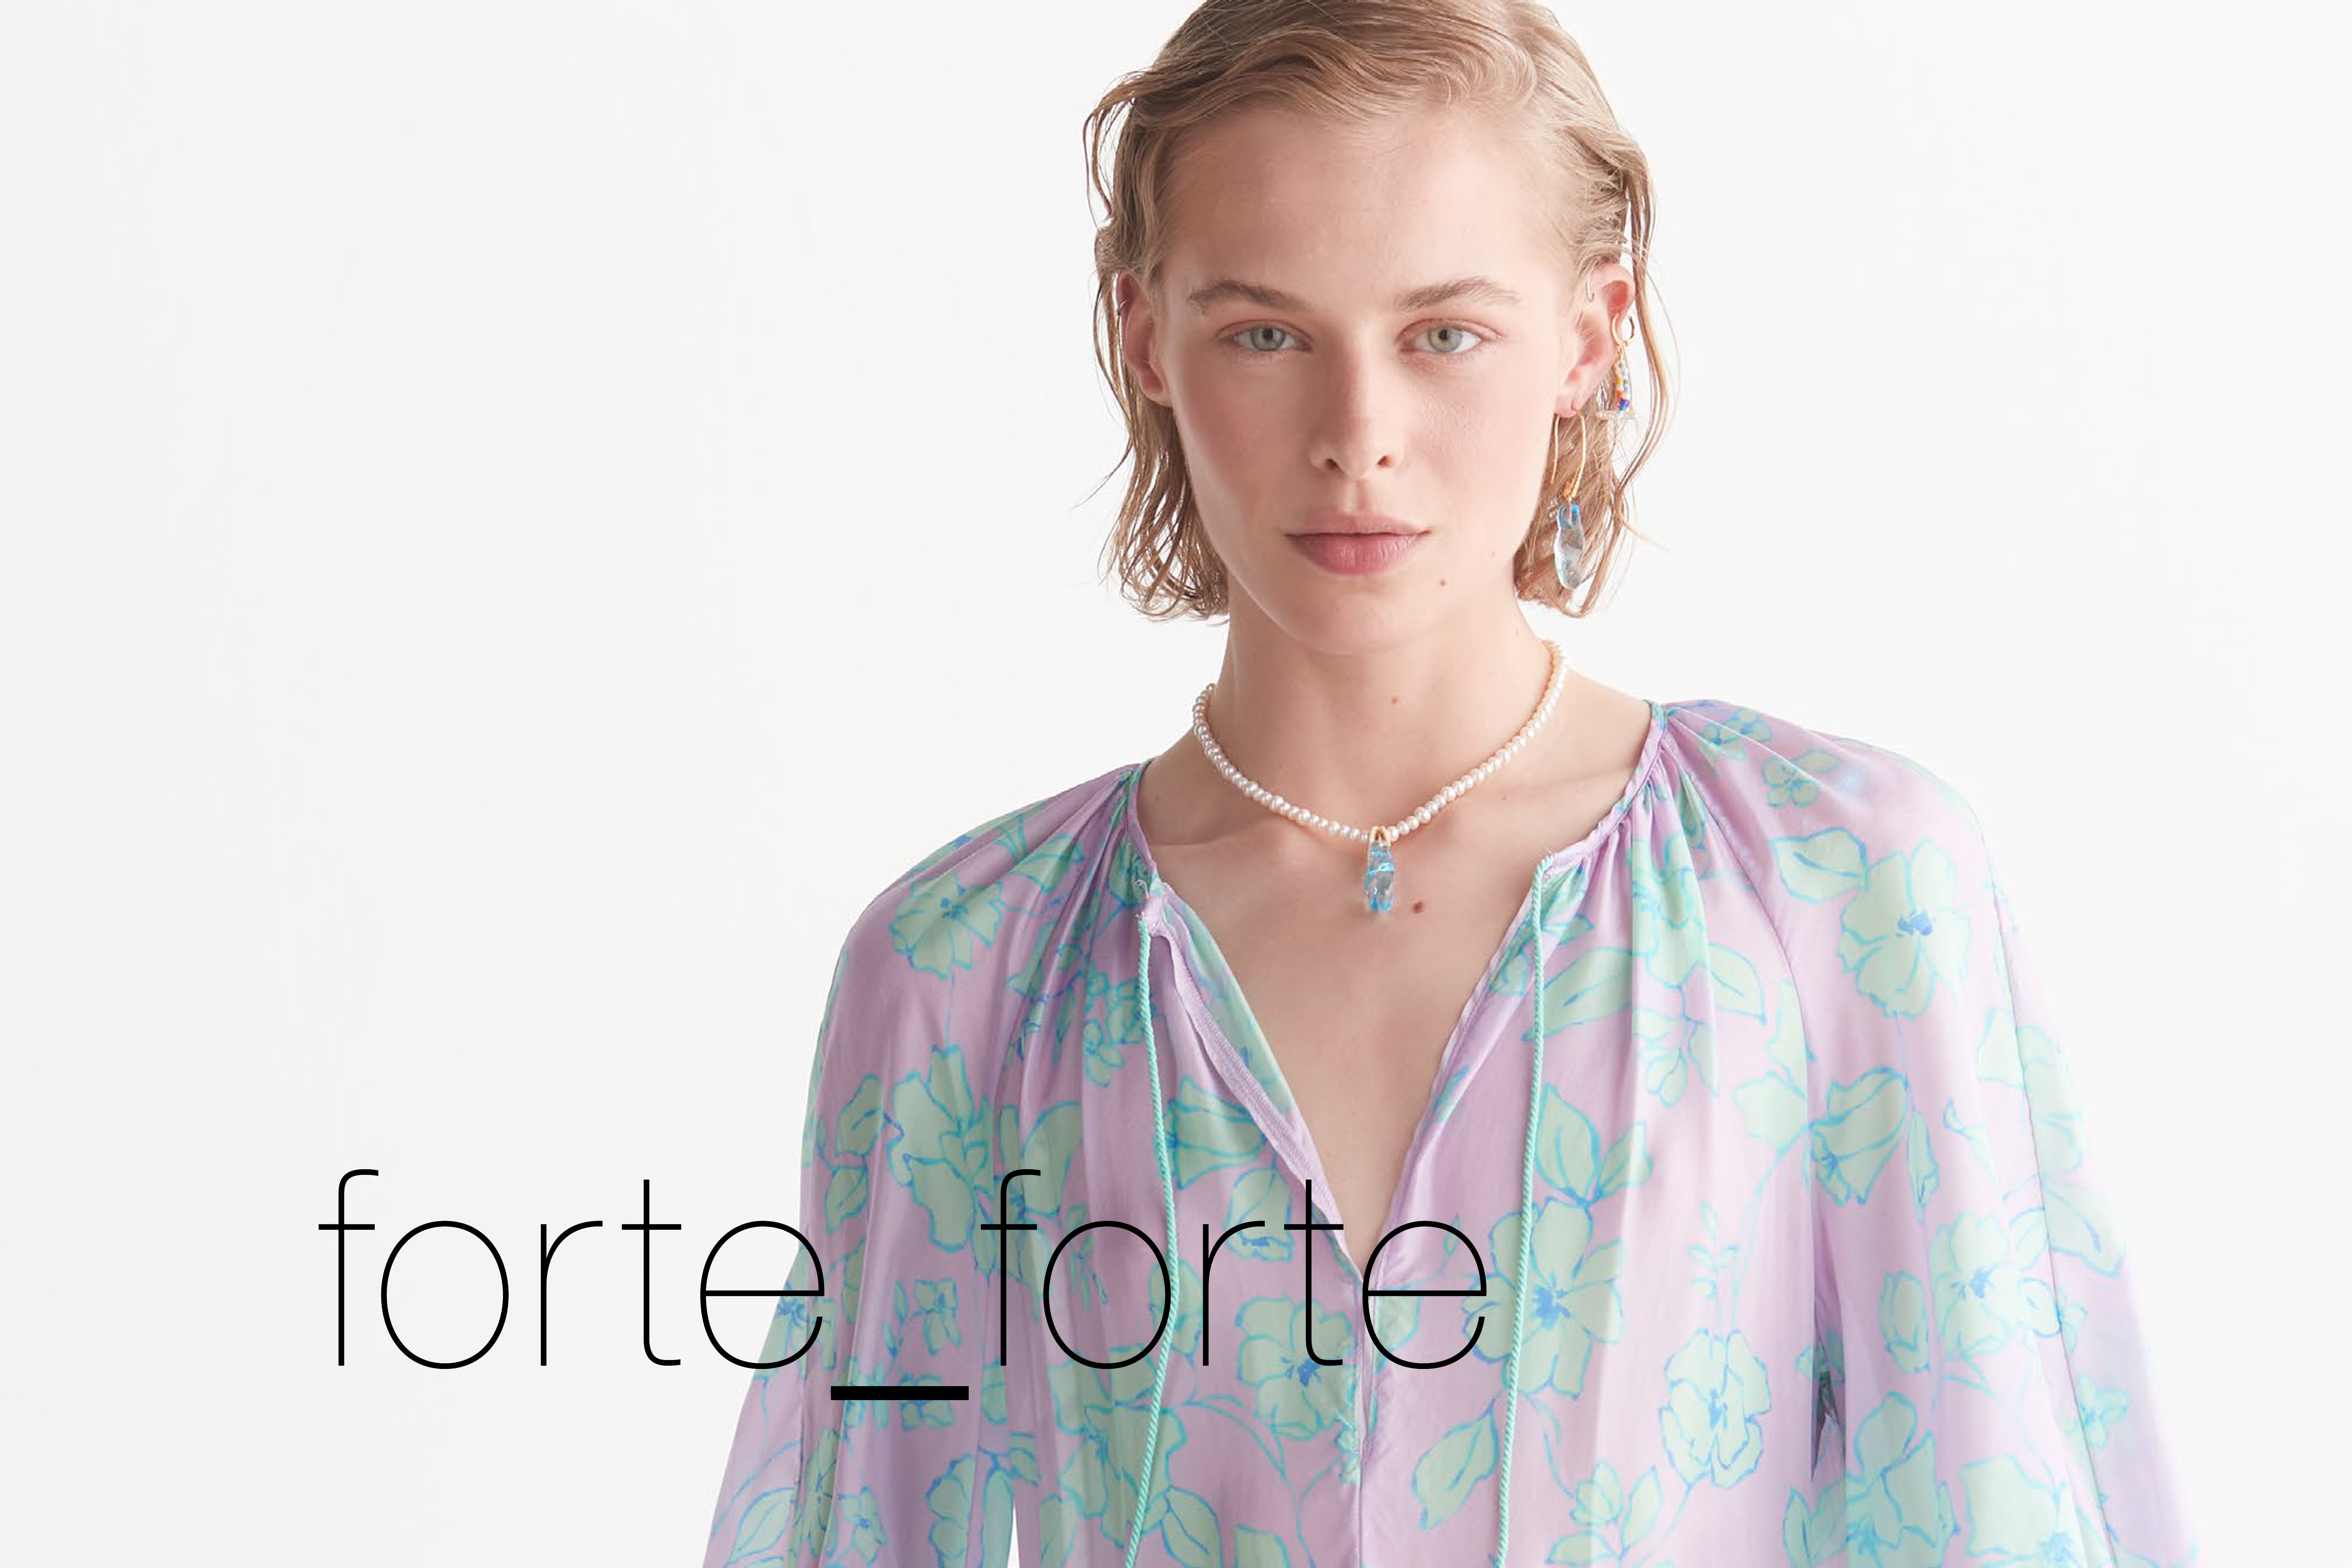 forte_forte pop up store News｜Ron Herman